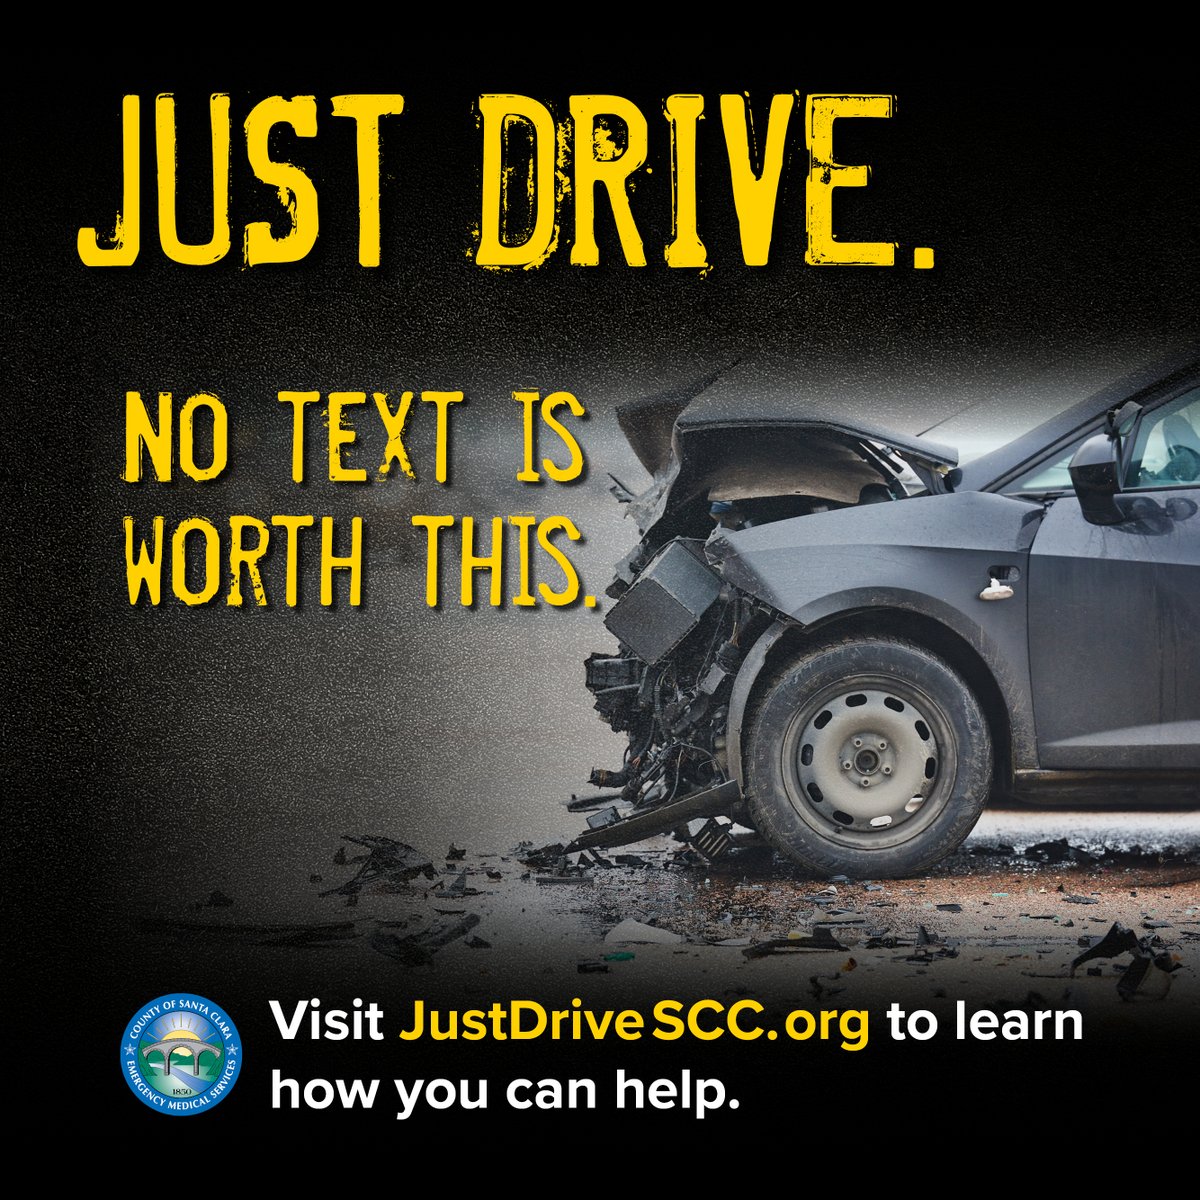 No text or dating app notification is worth your life or the lives of others. During Distracted Driving Awareness Month, make the pledge to put the phone down and keep your eyes on the road. You can help keep you, your family and others safe at justdrivescc.org.